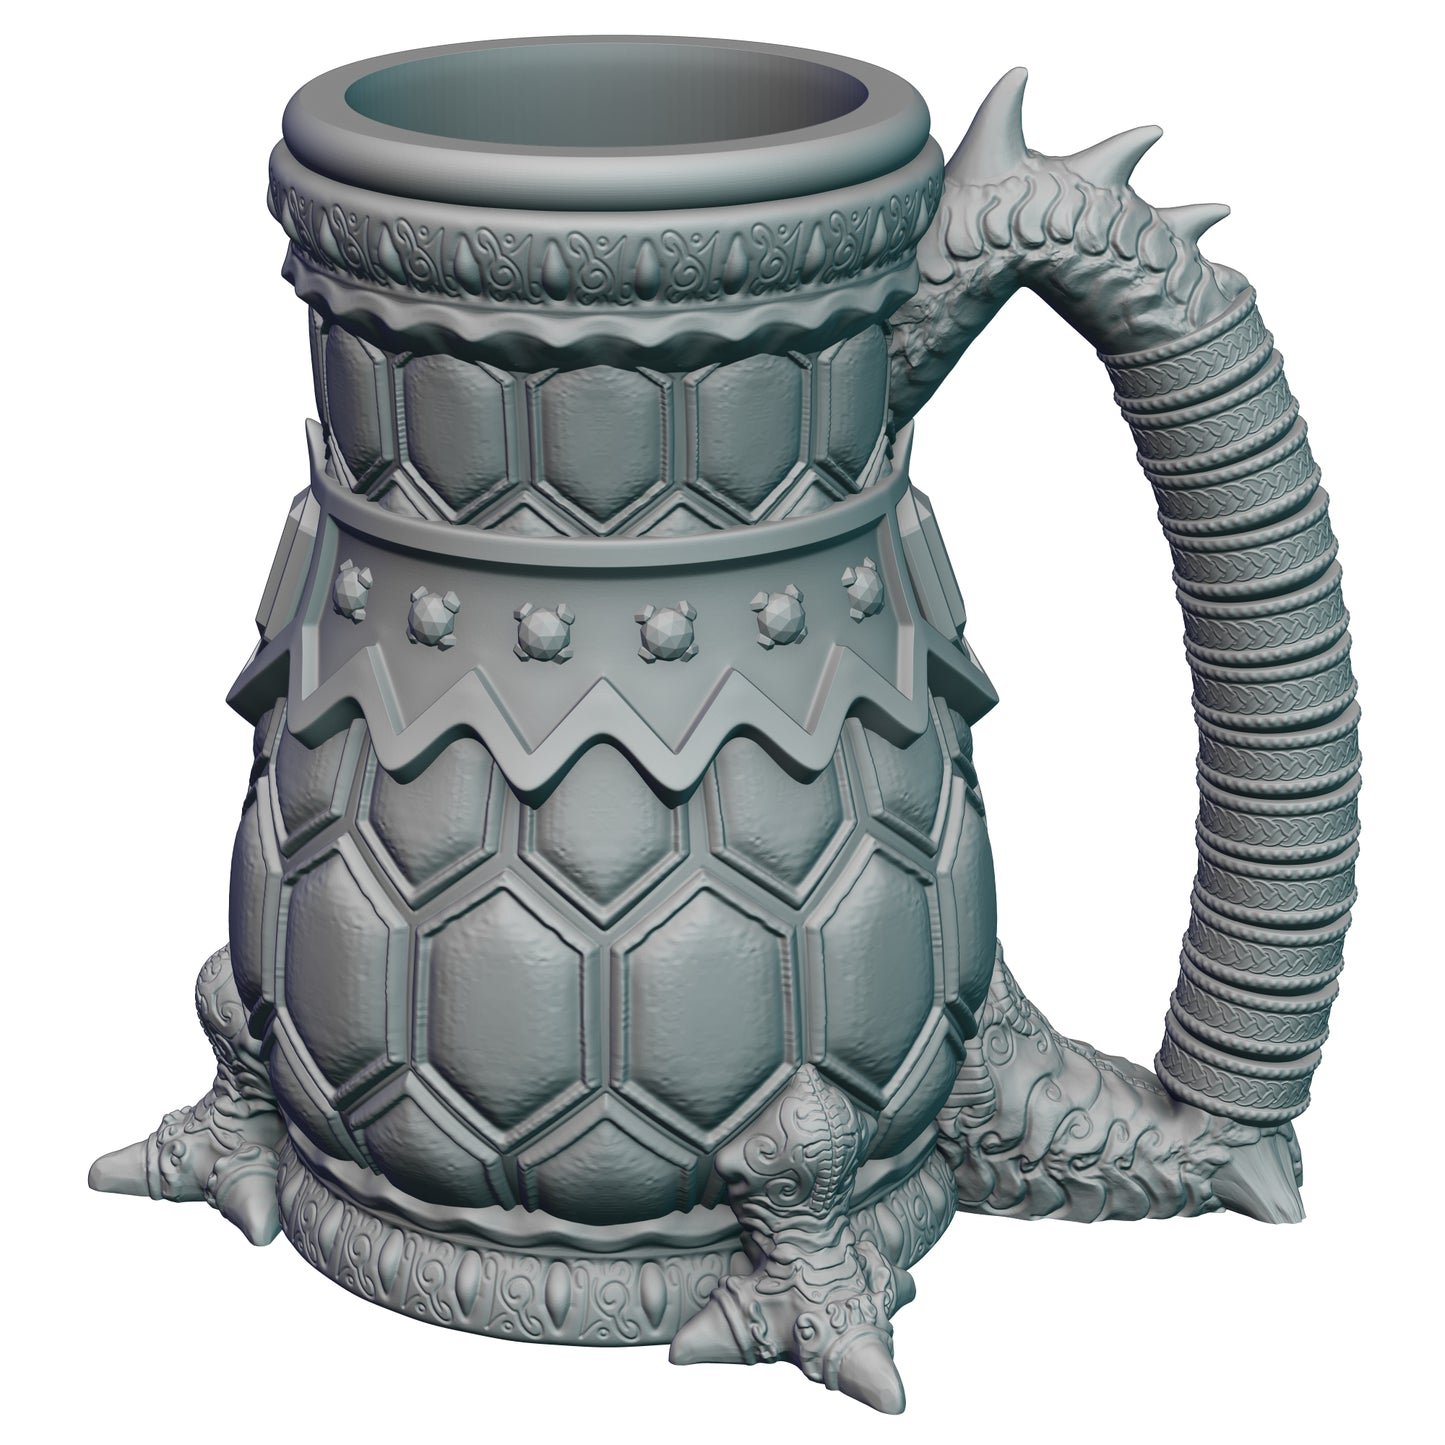 Dragon Blooded Gaming Mug with Twist-Off Cover: Dual-Purpose Dice and Beverage Can Holder